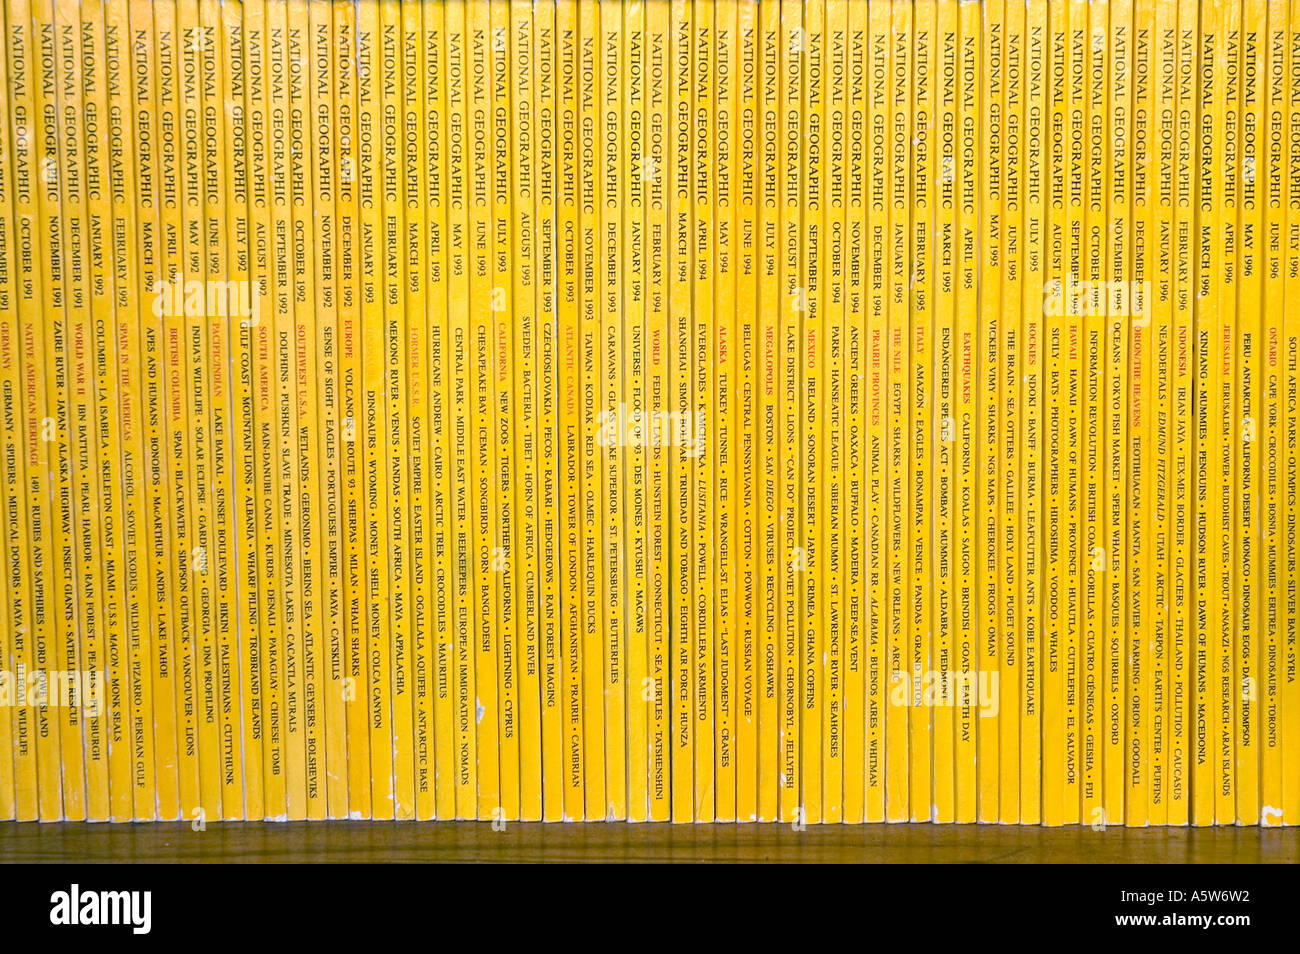 National Geographic magazines in a bookcase. Editorial use only. DSC 8518 Stock Photo